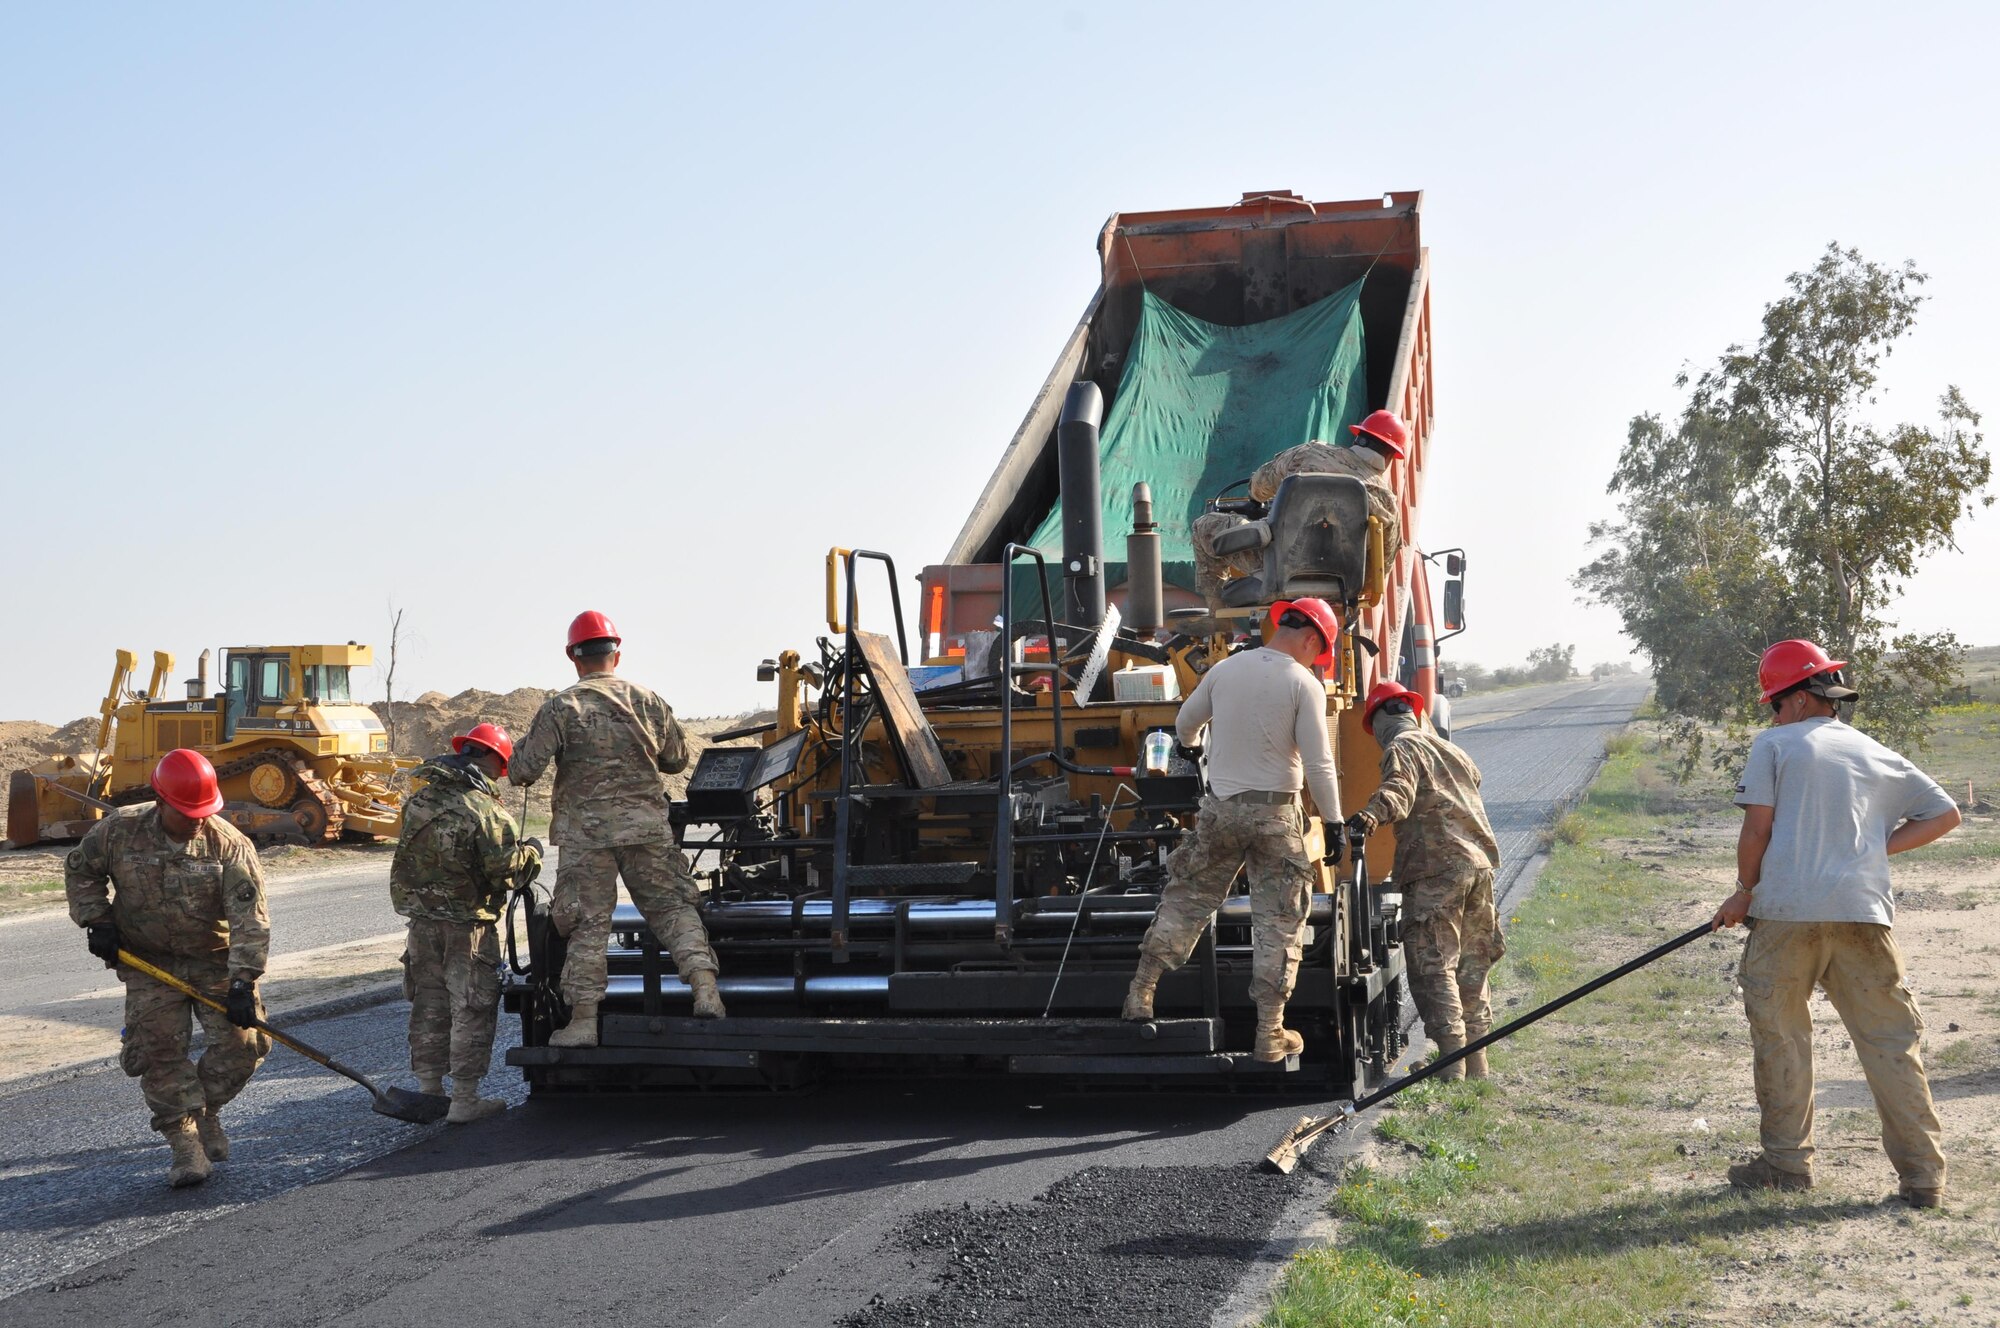 Members of the 557th Expeditionary Civil Engineers Group, Red Horse, construct a 2 mile long access road at an undisclosed location in Southwest Asia, January 20, 2016.  Red Horse personnel working this paving project are deployed from the 254th in Guam, Montana’s 219th, and the 210th out of New Mexico.  (U.S. Air Force photo by Master Sgt. Kevin Nichols)